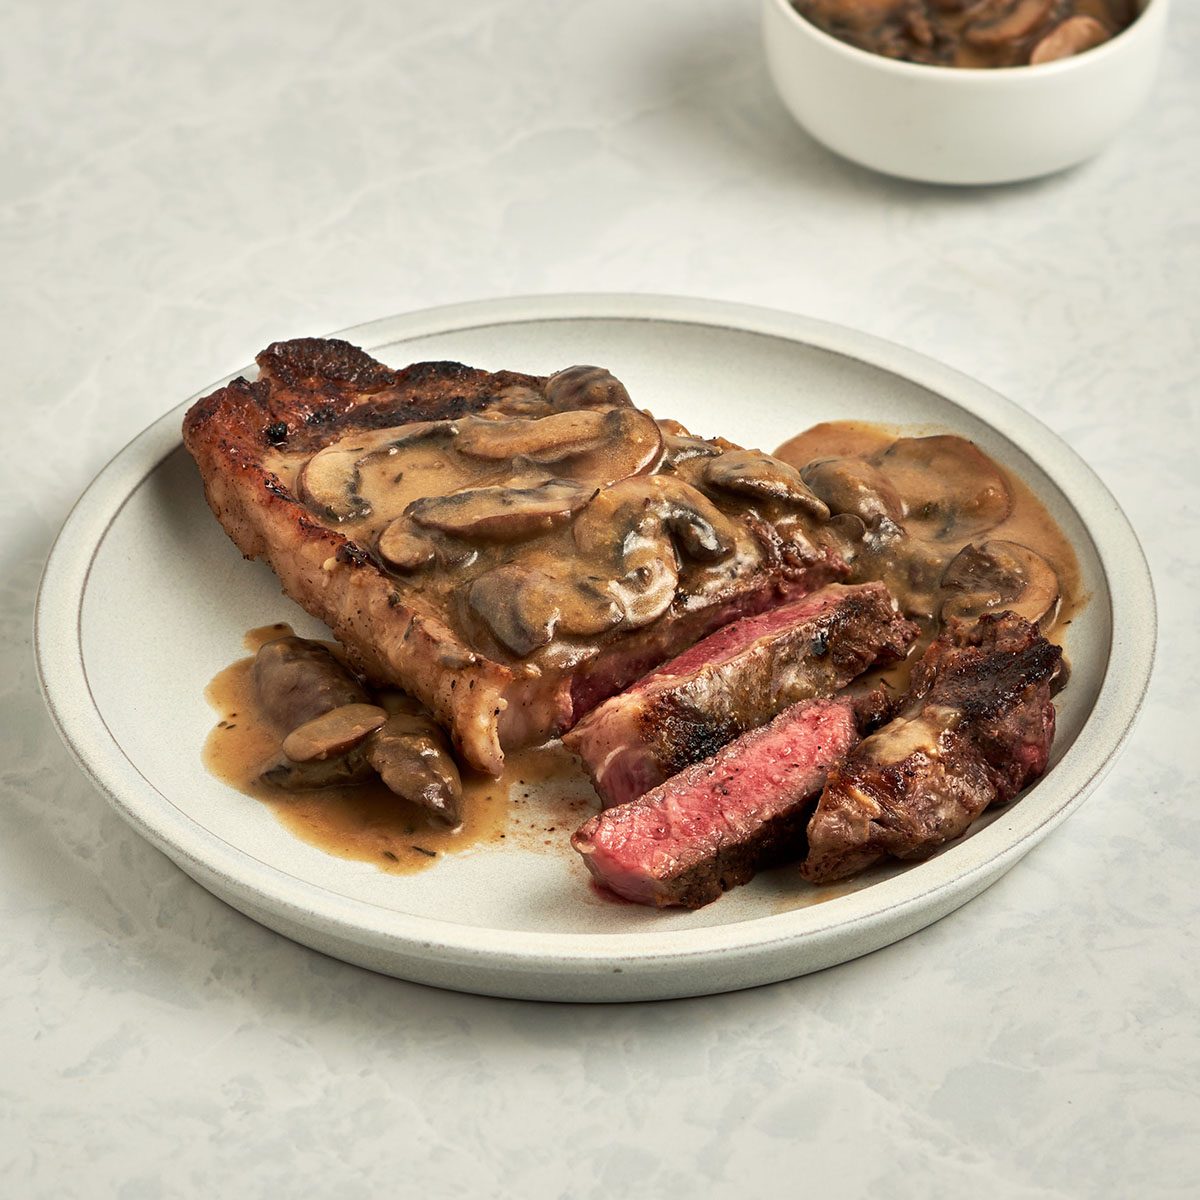 Grilled Steaks with Mushroom Sauce